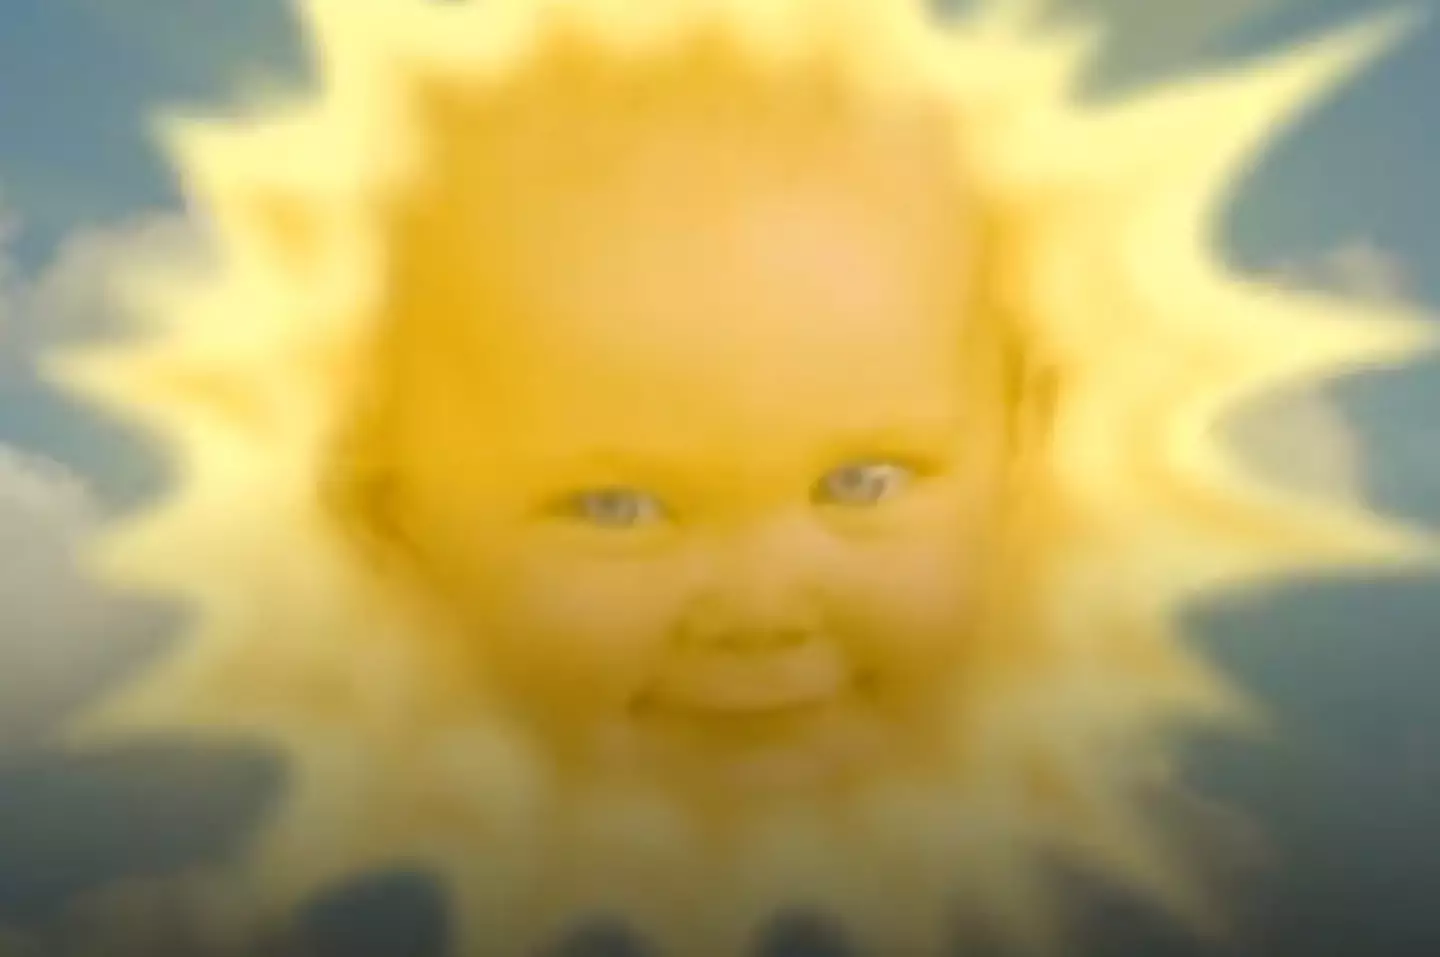 Jess played the sun baby in Teletubbies.